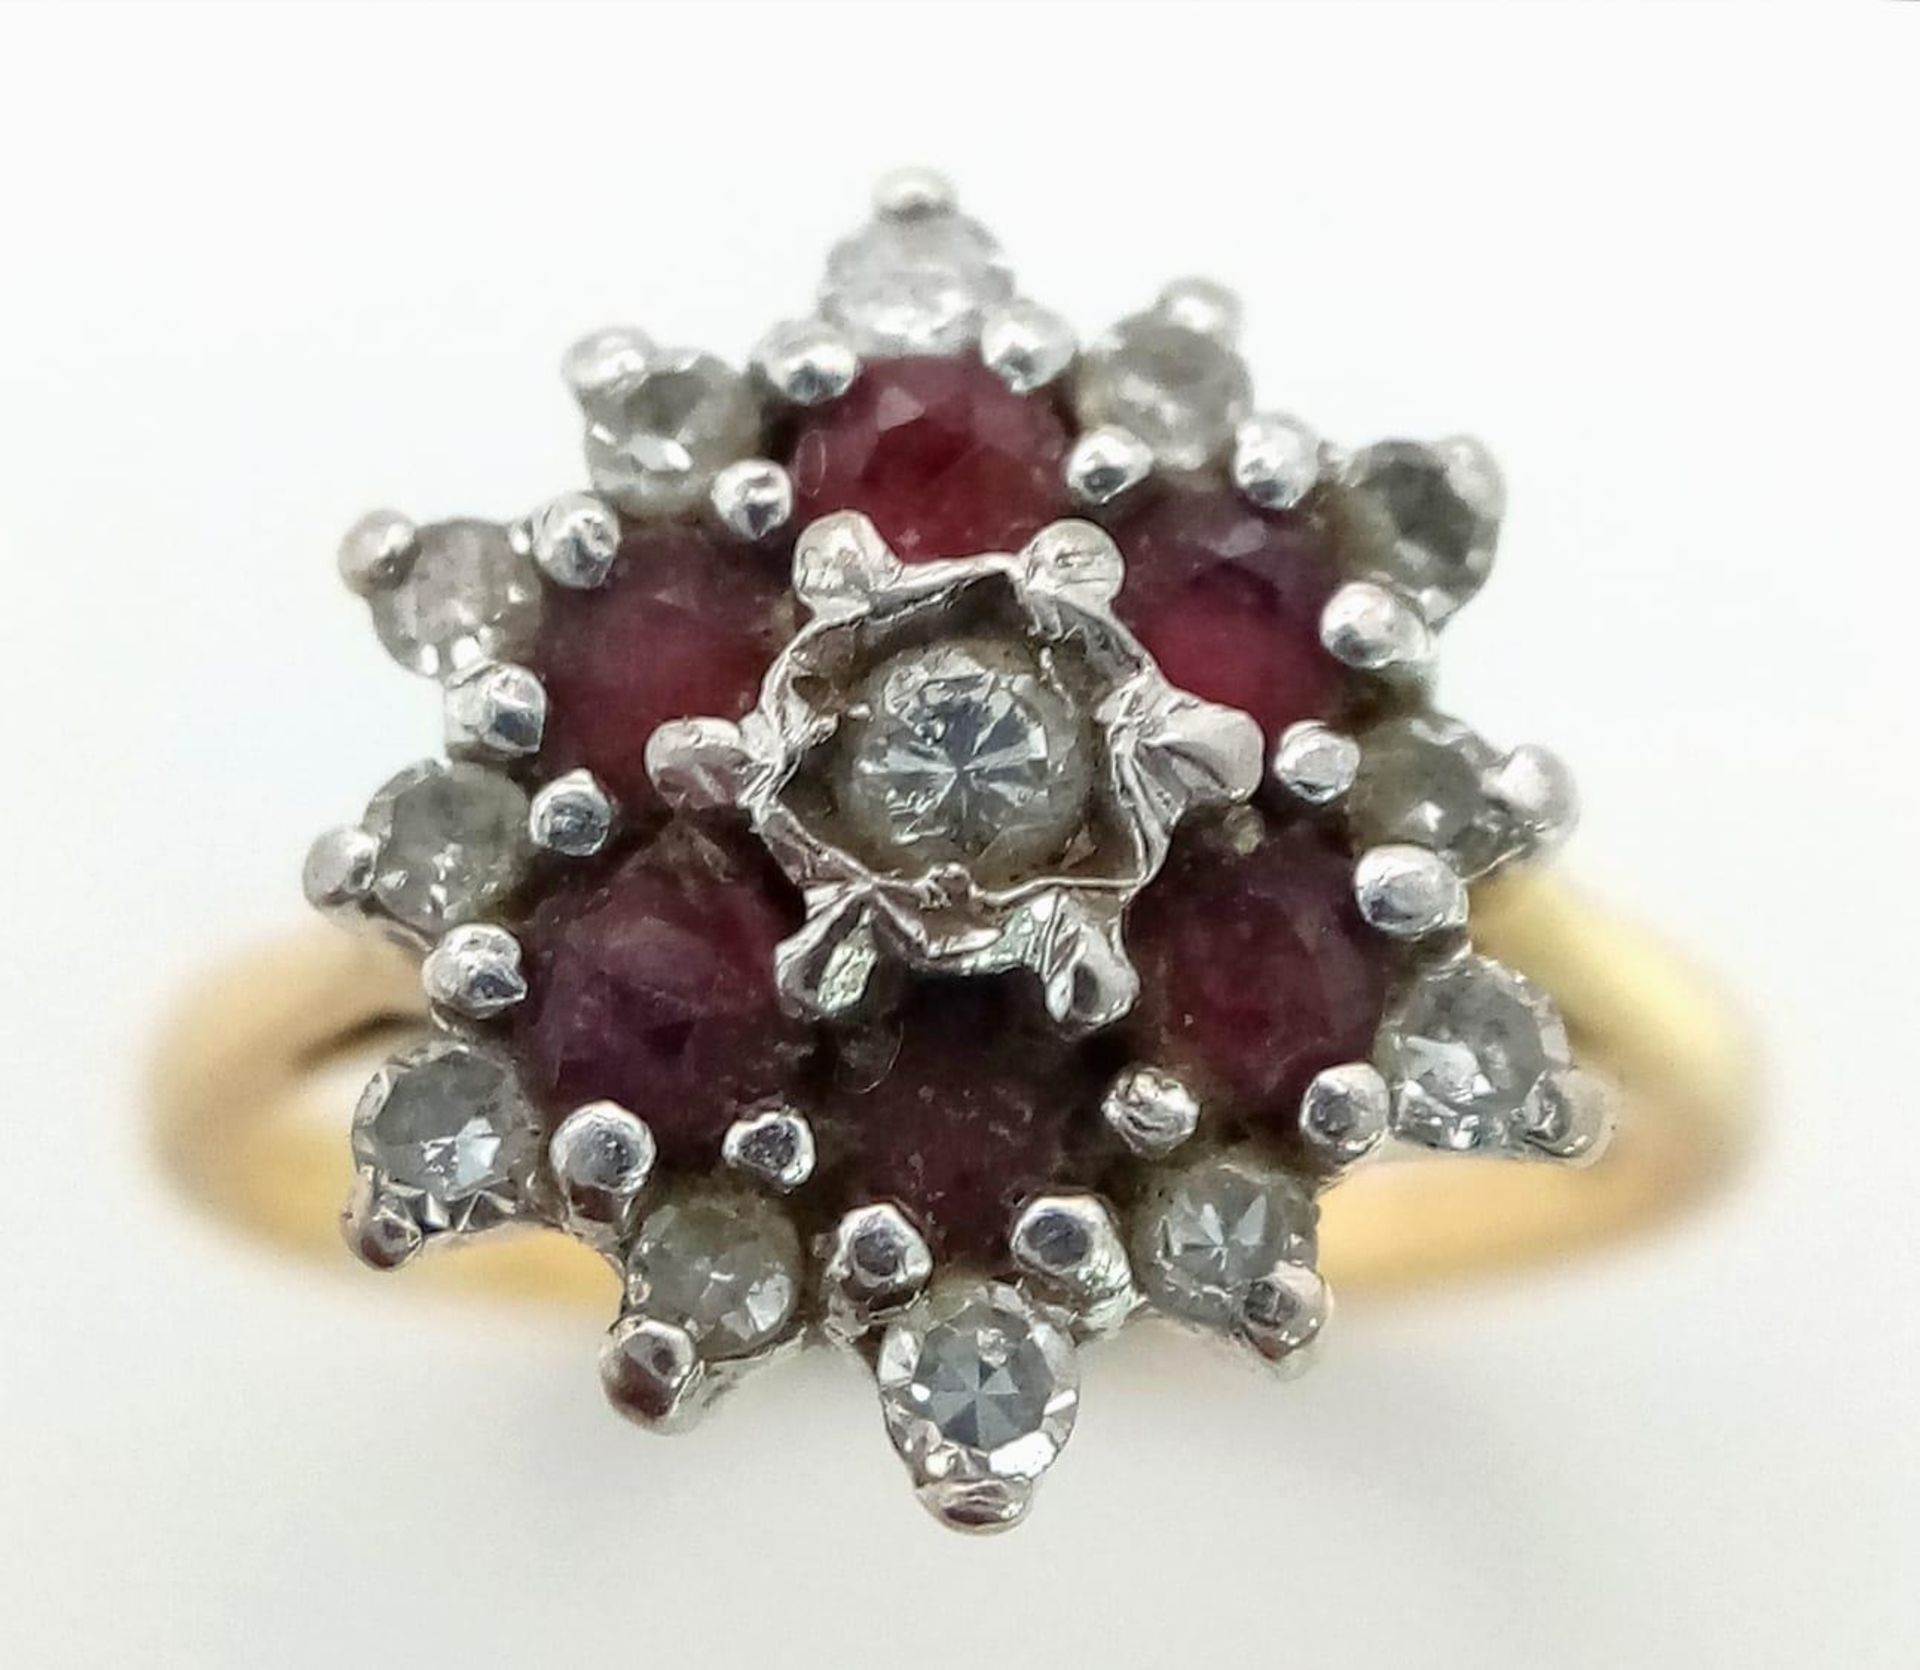 18K YELLOW GOLD DIAMOND & RUBY CLUSTER RING. TOTAL WEIGHT 3.4G. SIZE K